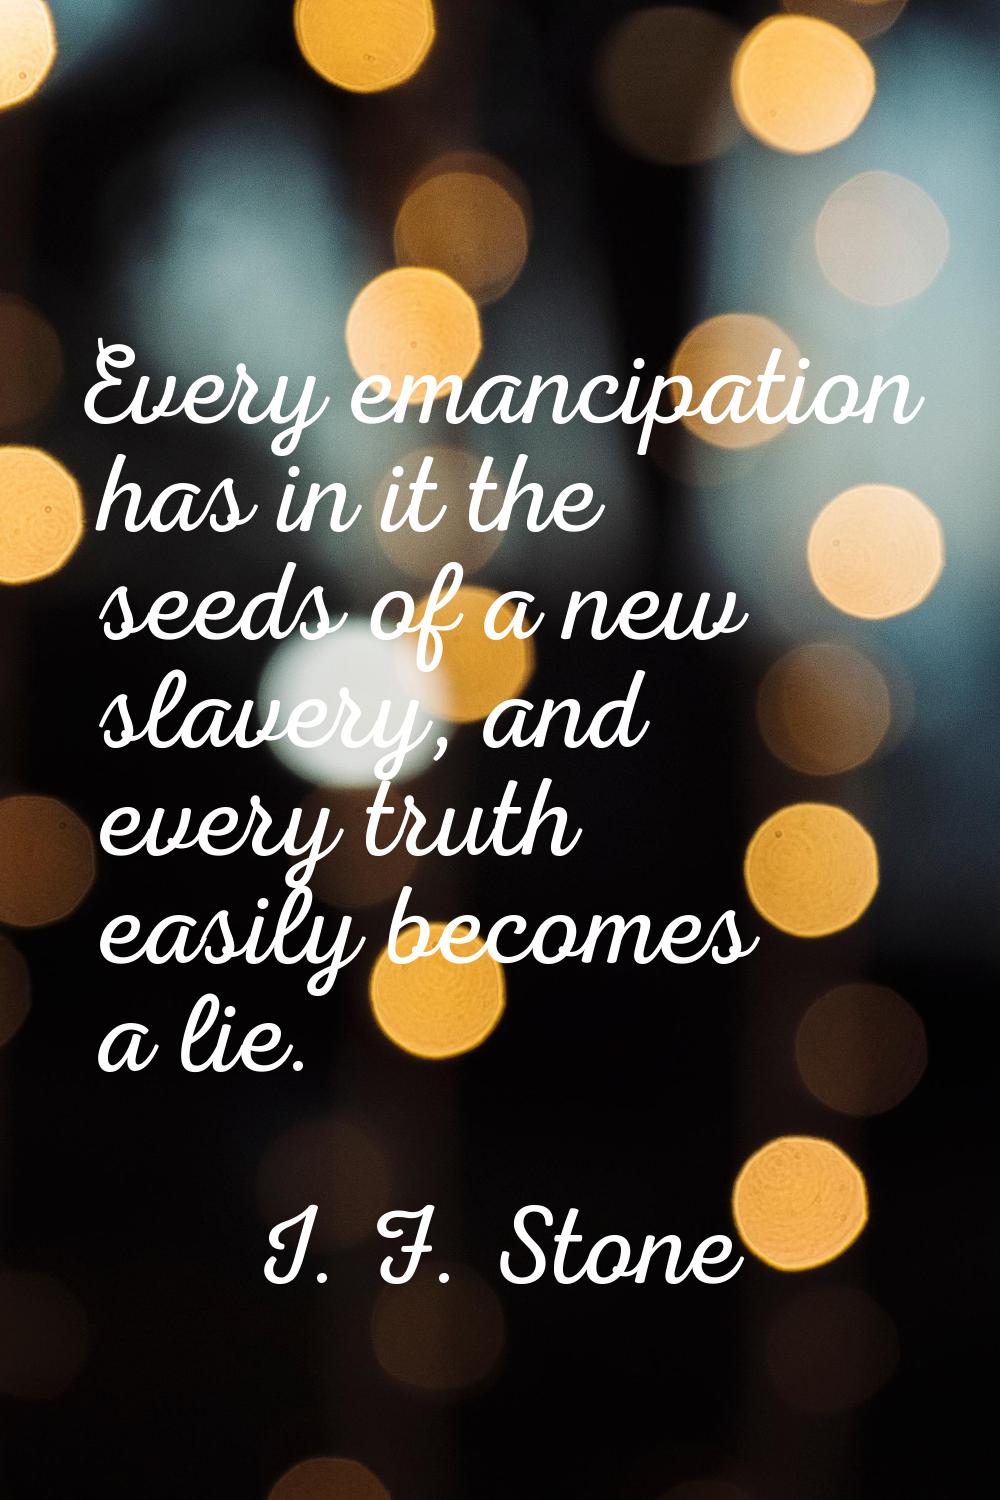 Every emancipation has in it the seeds of a new slavery, and every truth easily becomes a lie.